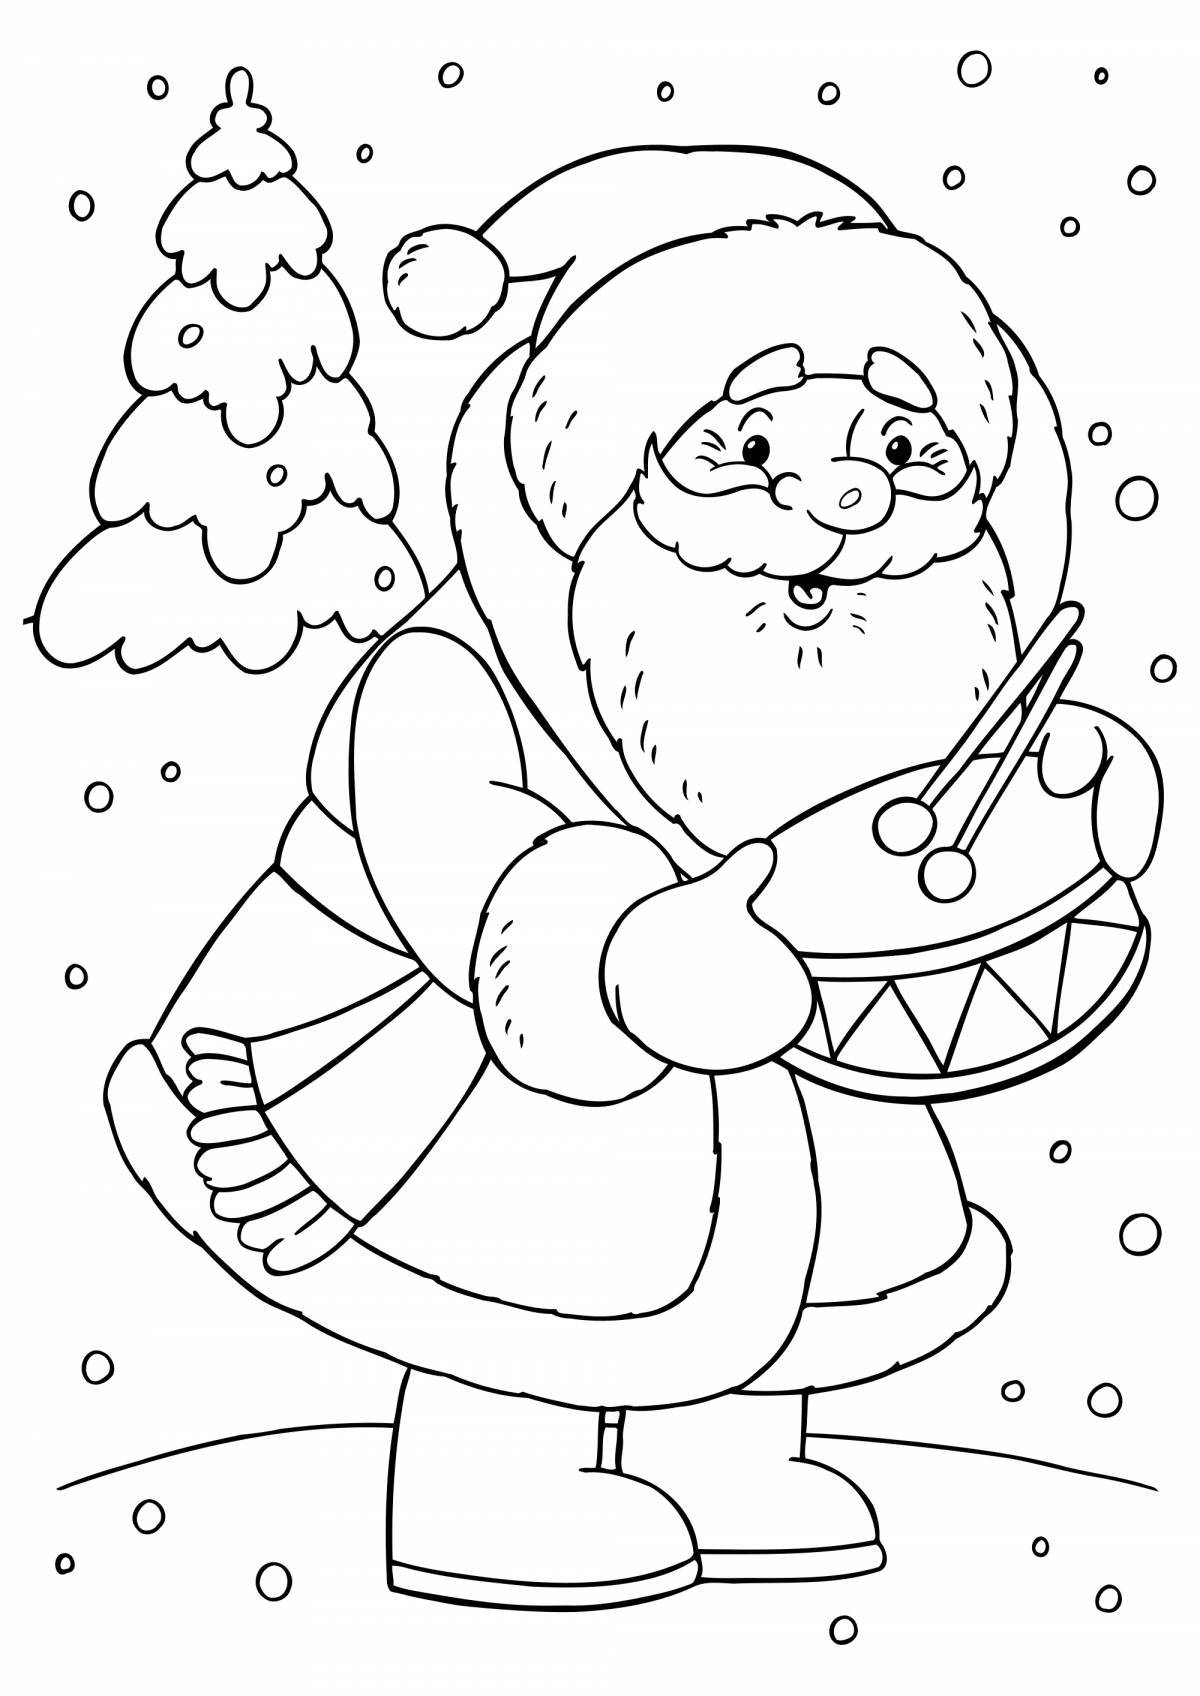 Large Christmas coloring book